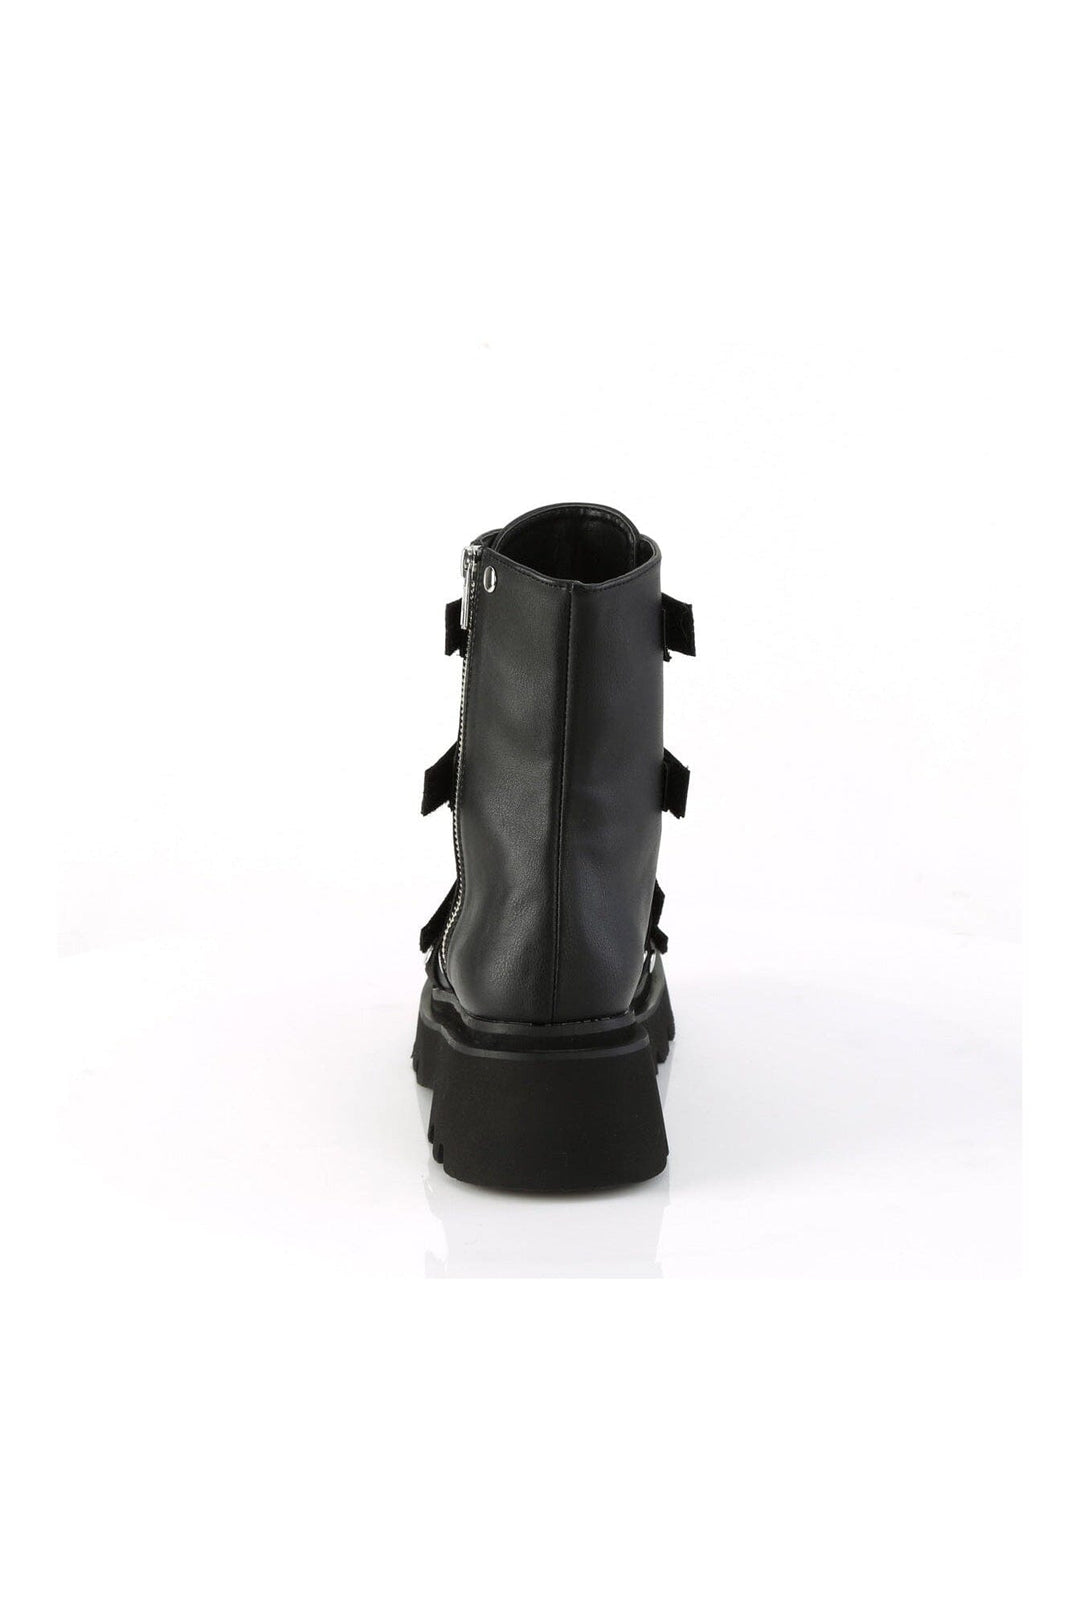 RENEGADE-50 Black Vegan Leather Ankle Boot-Ankle Boots-Demonia-SEXYSHOES.COM